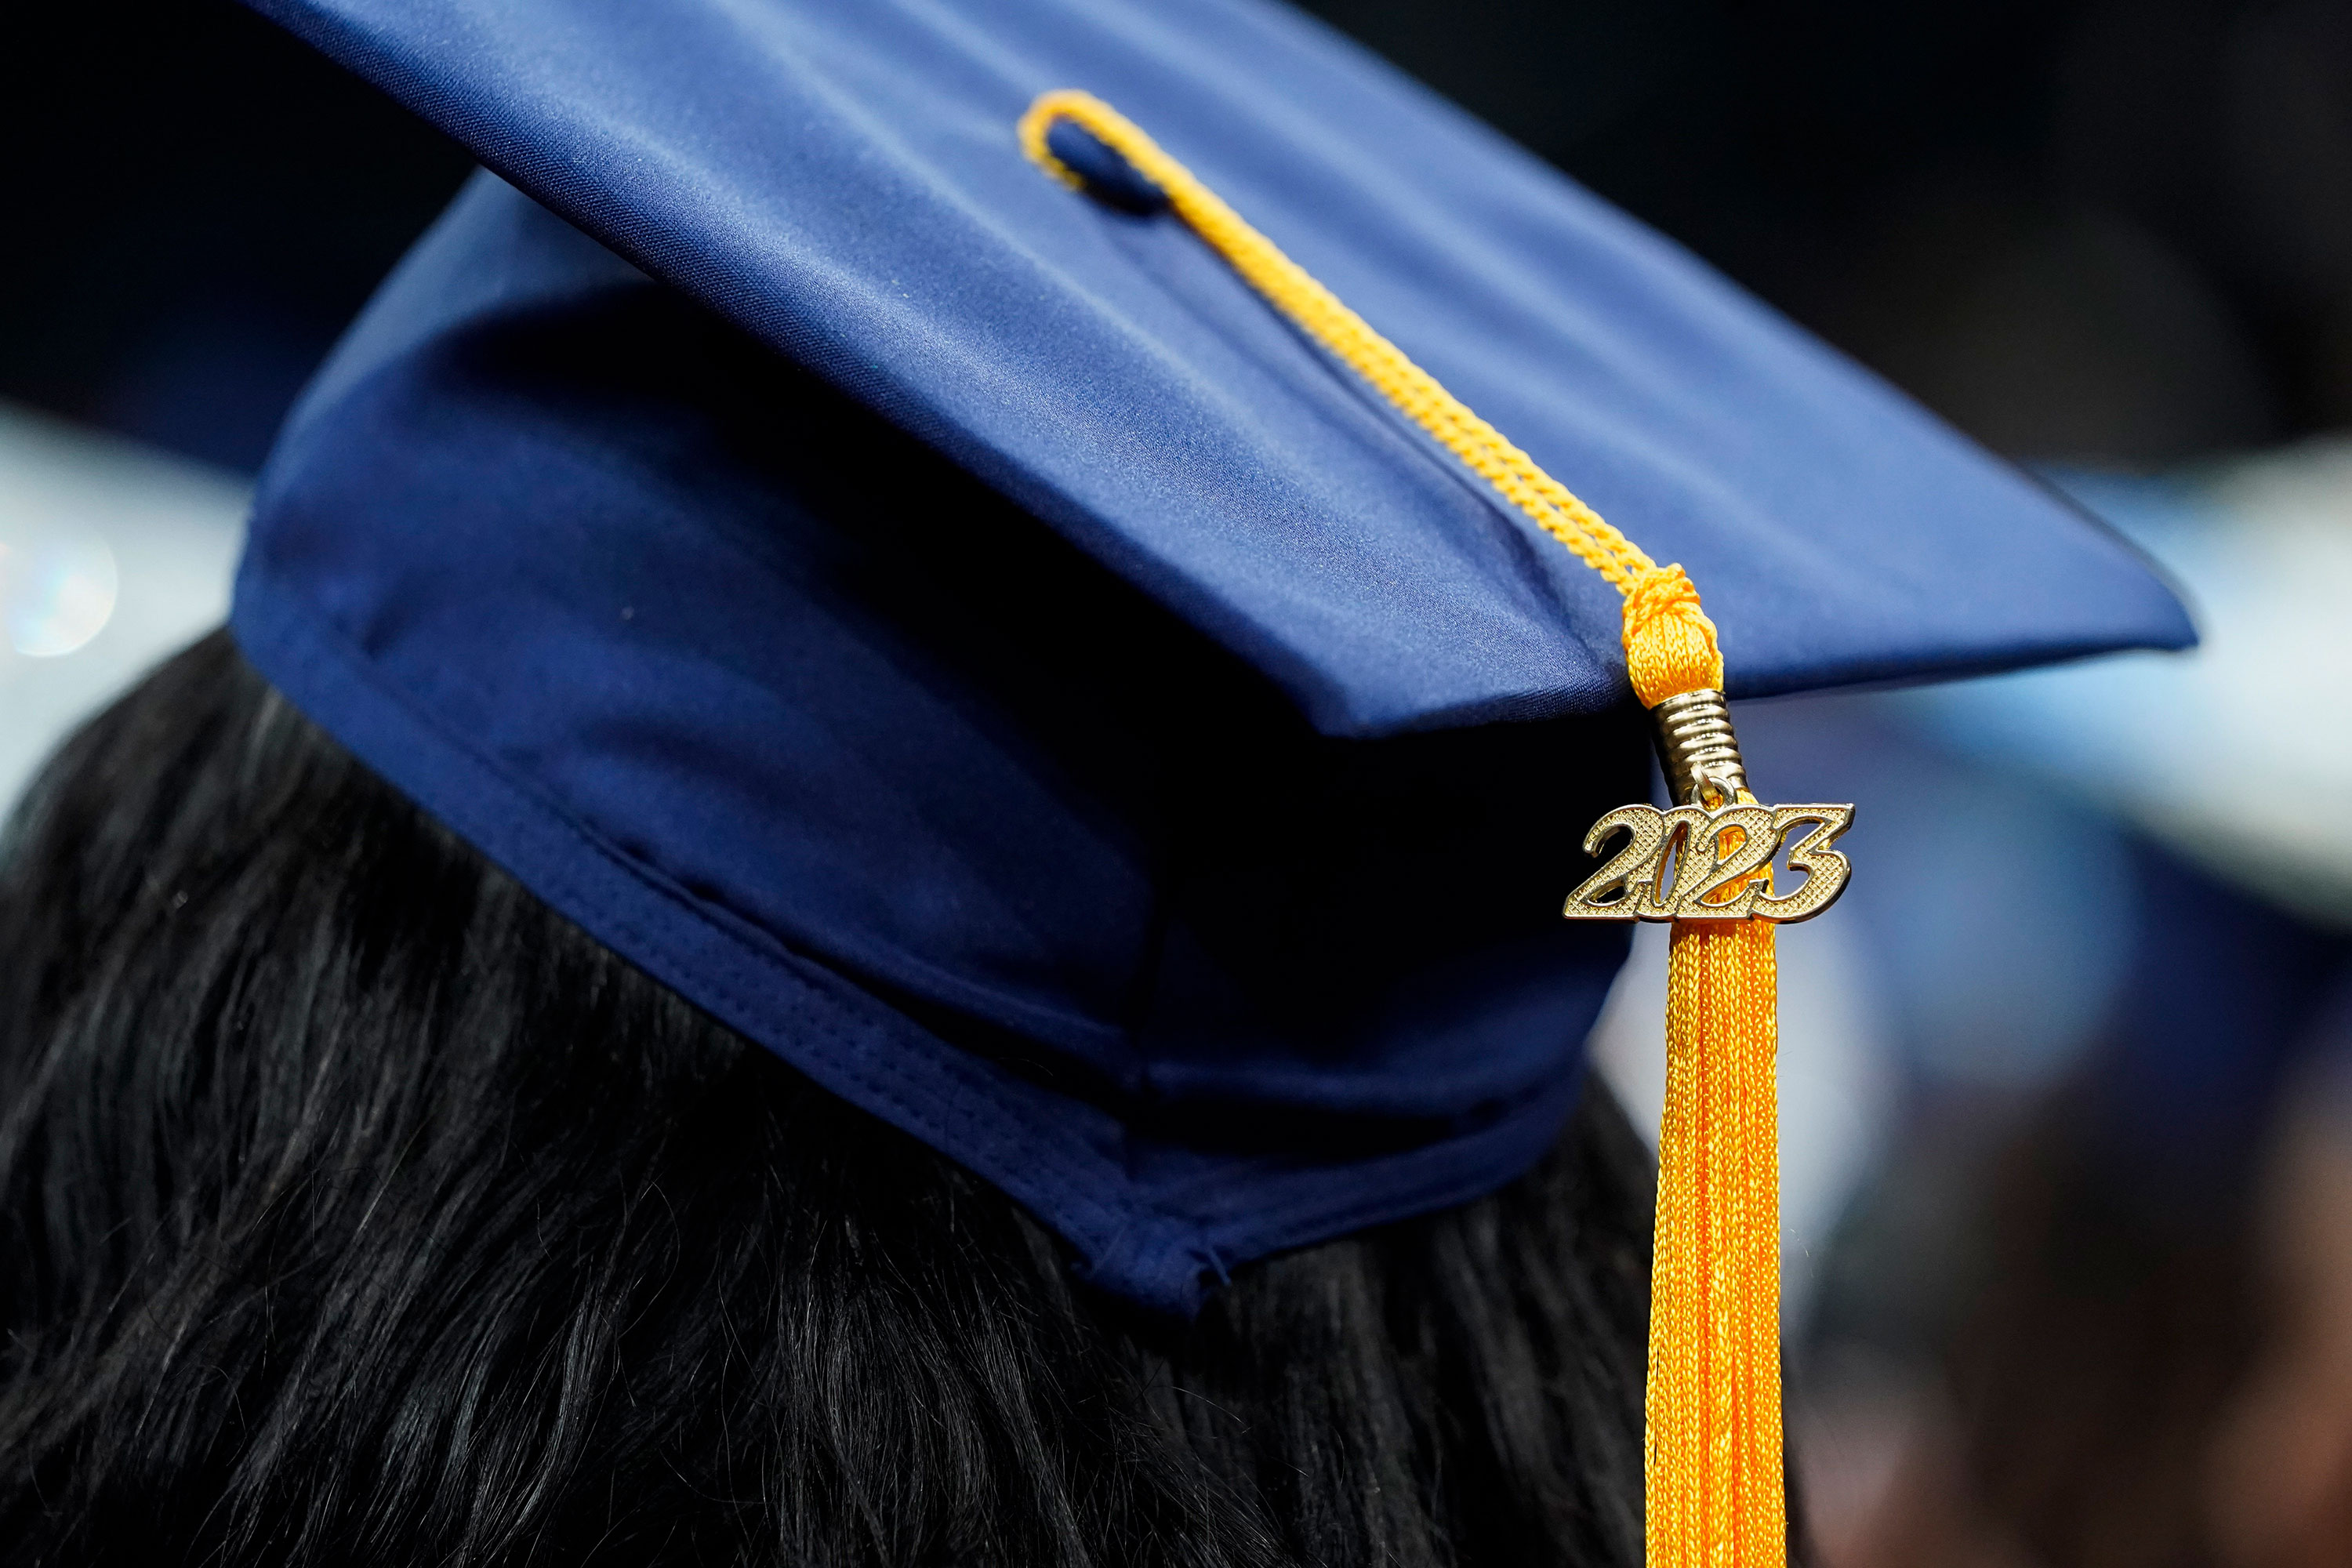 A 2023 tassel rests on a graduation cap as students walk in a procession for Howard University's commencement in Washington, DC, on May 13. 